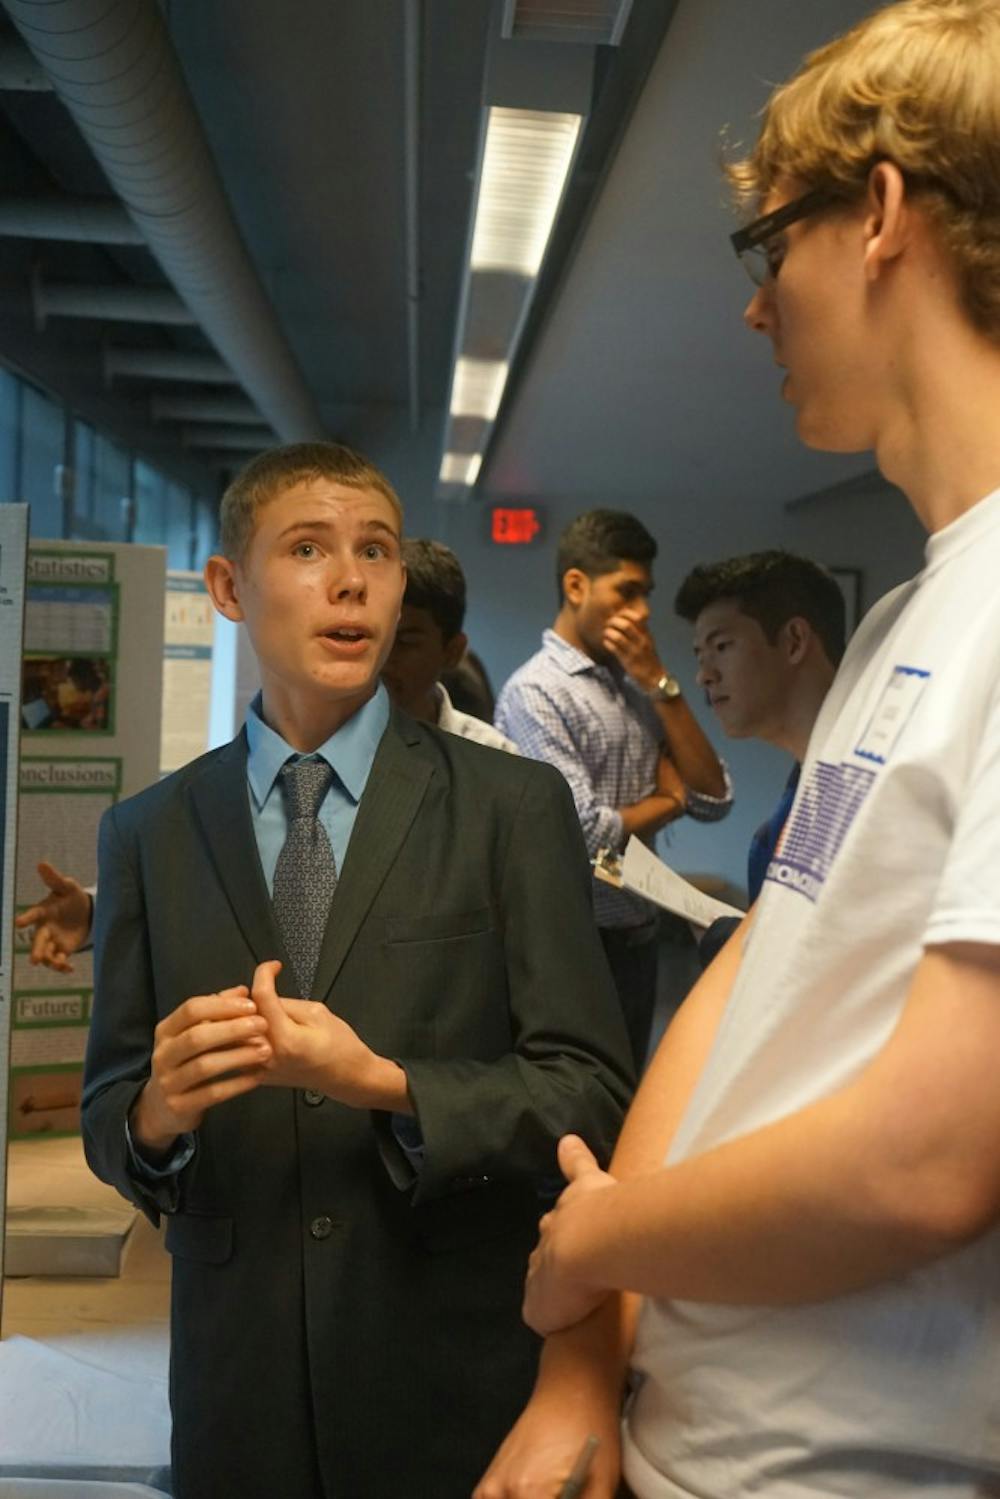 A high school student presented his science project to a Penn judge in the Levine Hall Lobby last Thursday as part of NanoDays.